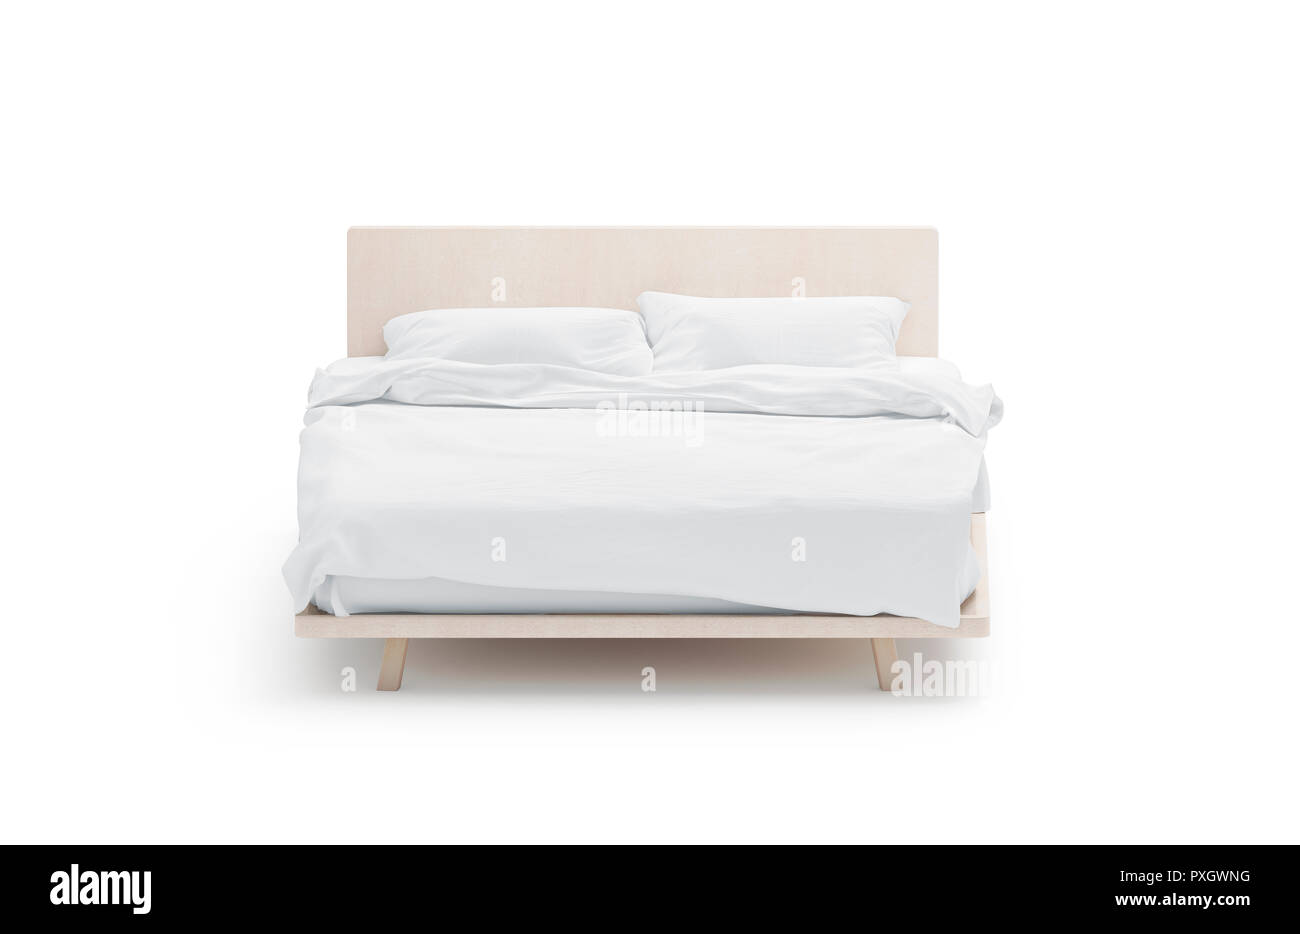 Blank white bed mockup, front view, isolated, 3d rendering. Empty tucked bedstead with pillows and blanket mock up. Clear bedclothes template. Place for sleep with mattress, pilow and duvet. Stock Photo